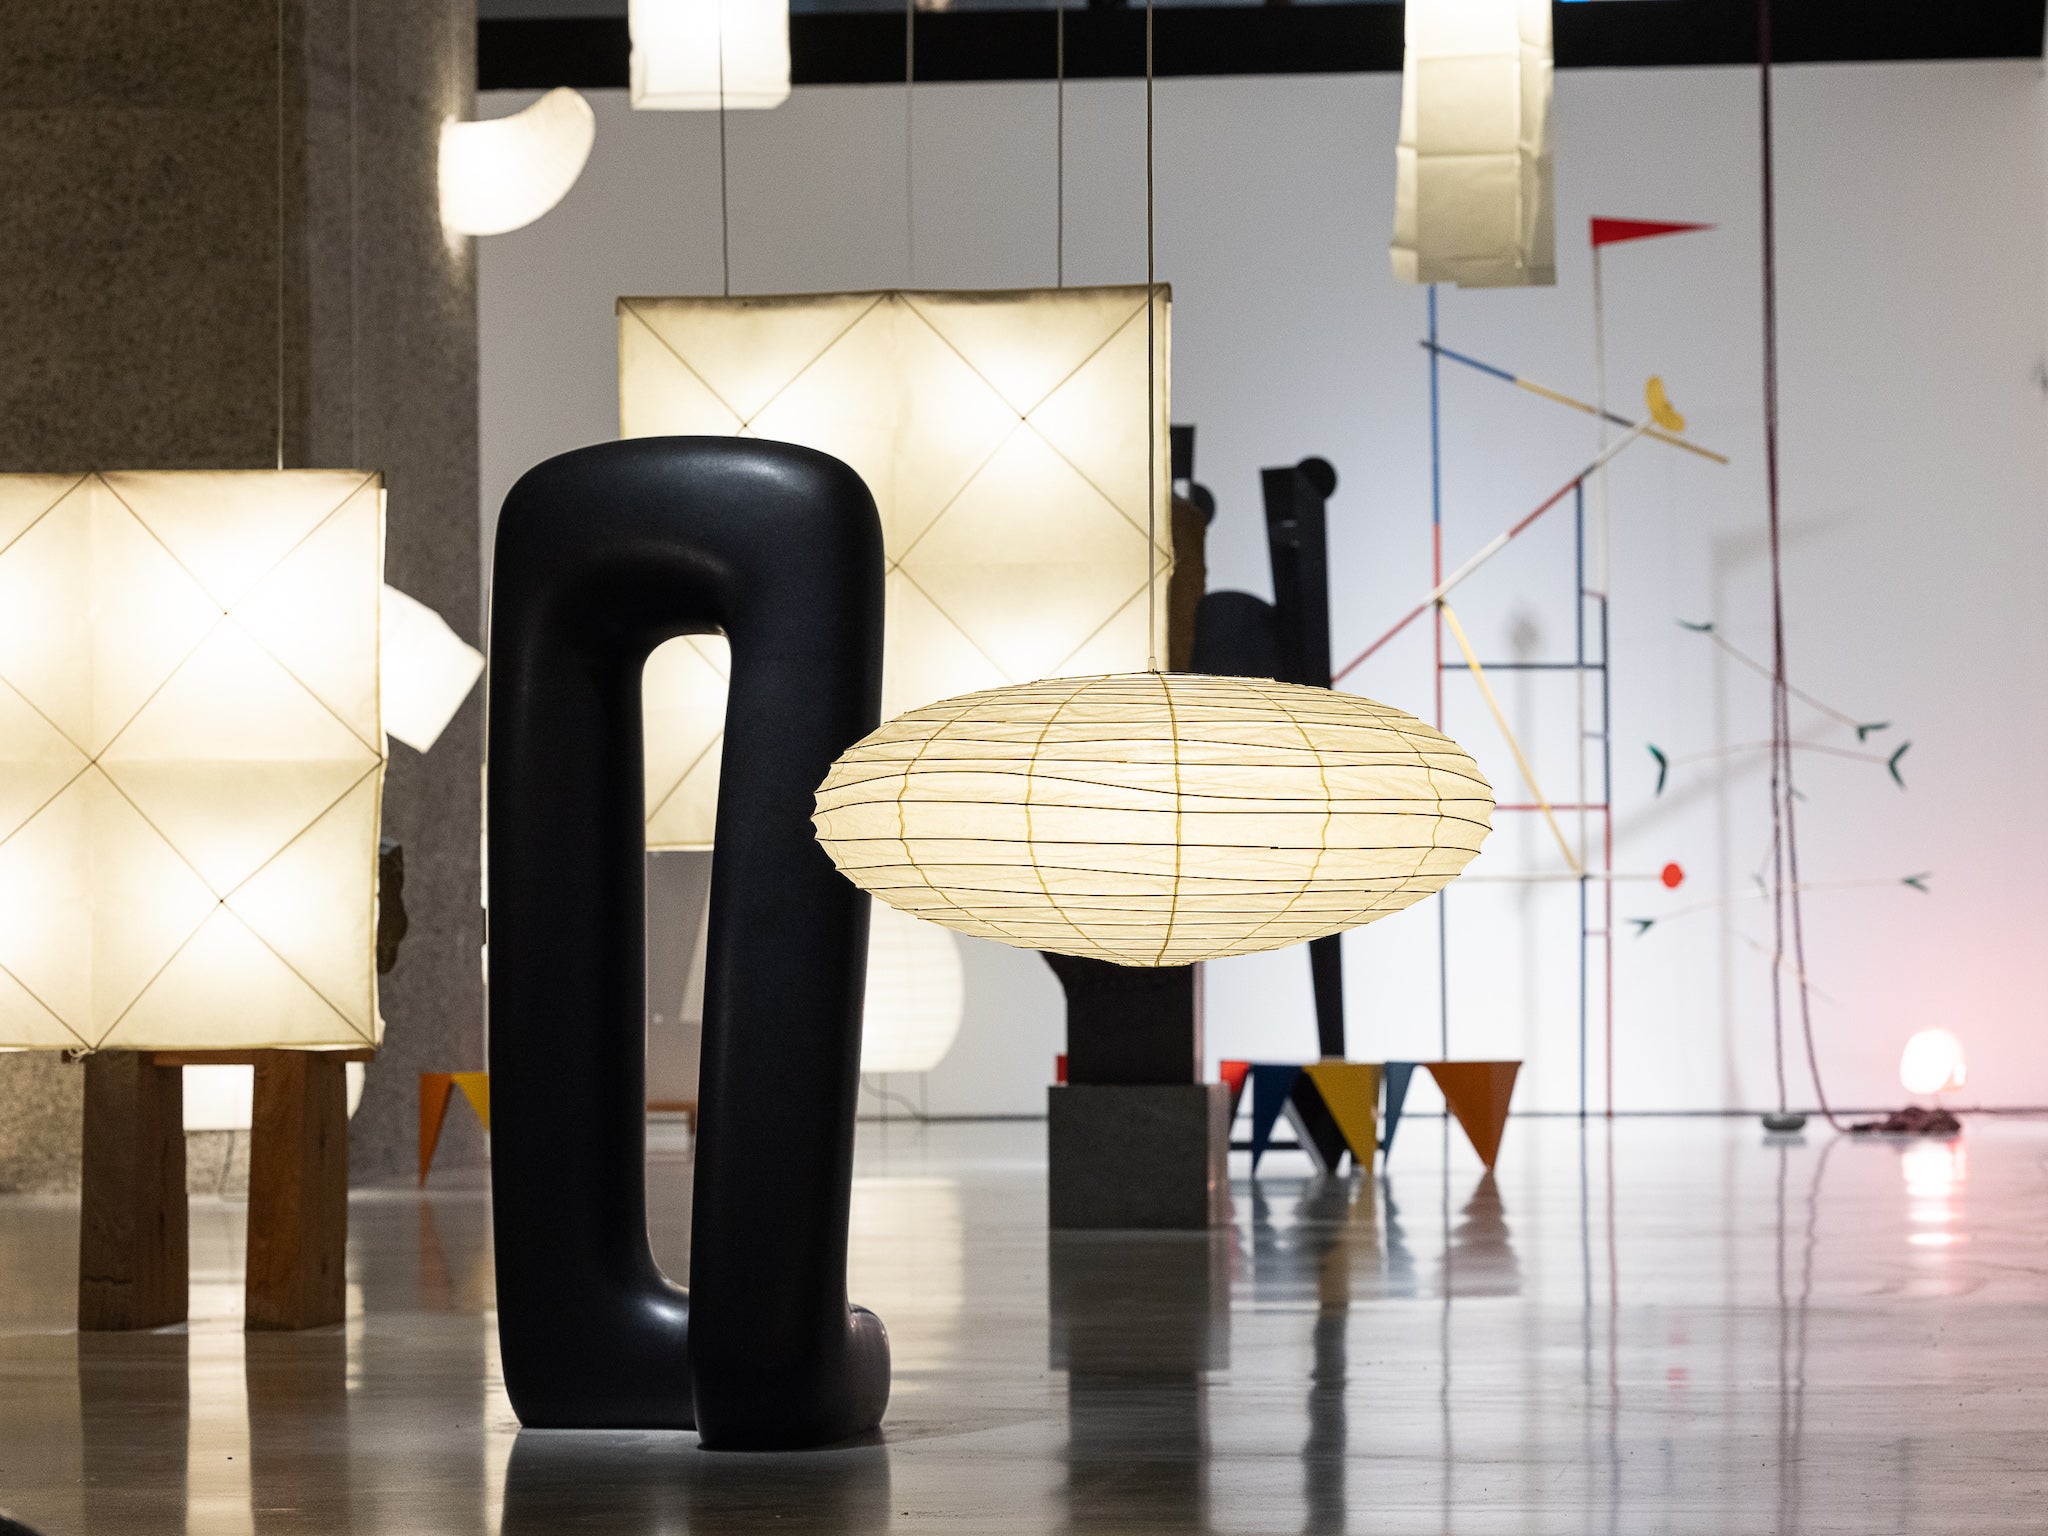 A selection of the 200 versions of the Akari lampshade illuminates the space